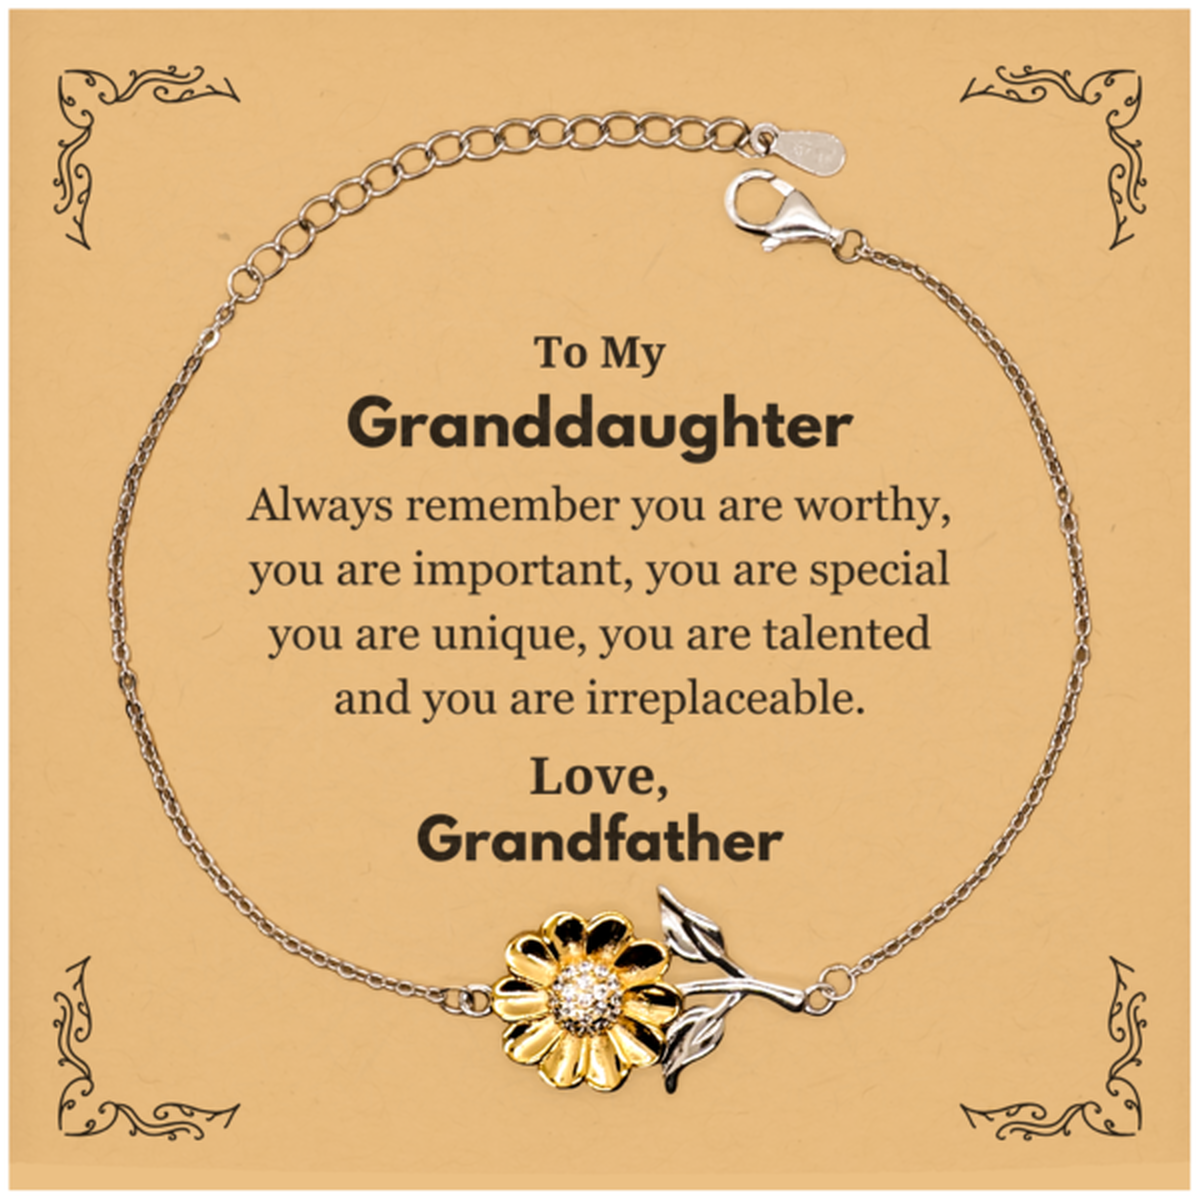 Granddaughter Birthday Gifts from Grandfather, Inspirational Sunflower Bracelet for Granddaughter Christmas Graduation Gifts for Granddaughter Always remember you are worthy, you are important. Love, Grandfather